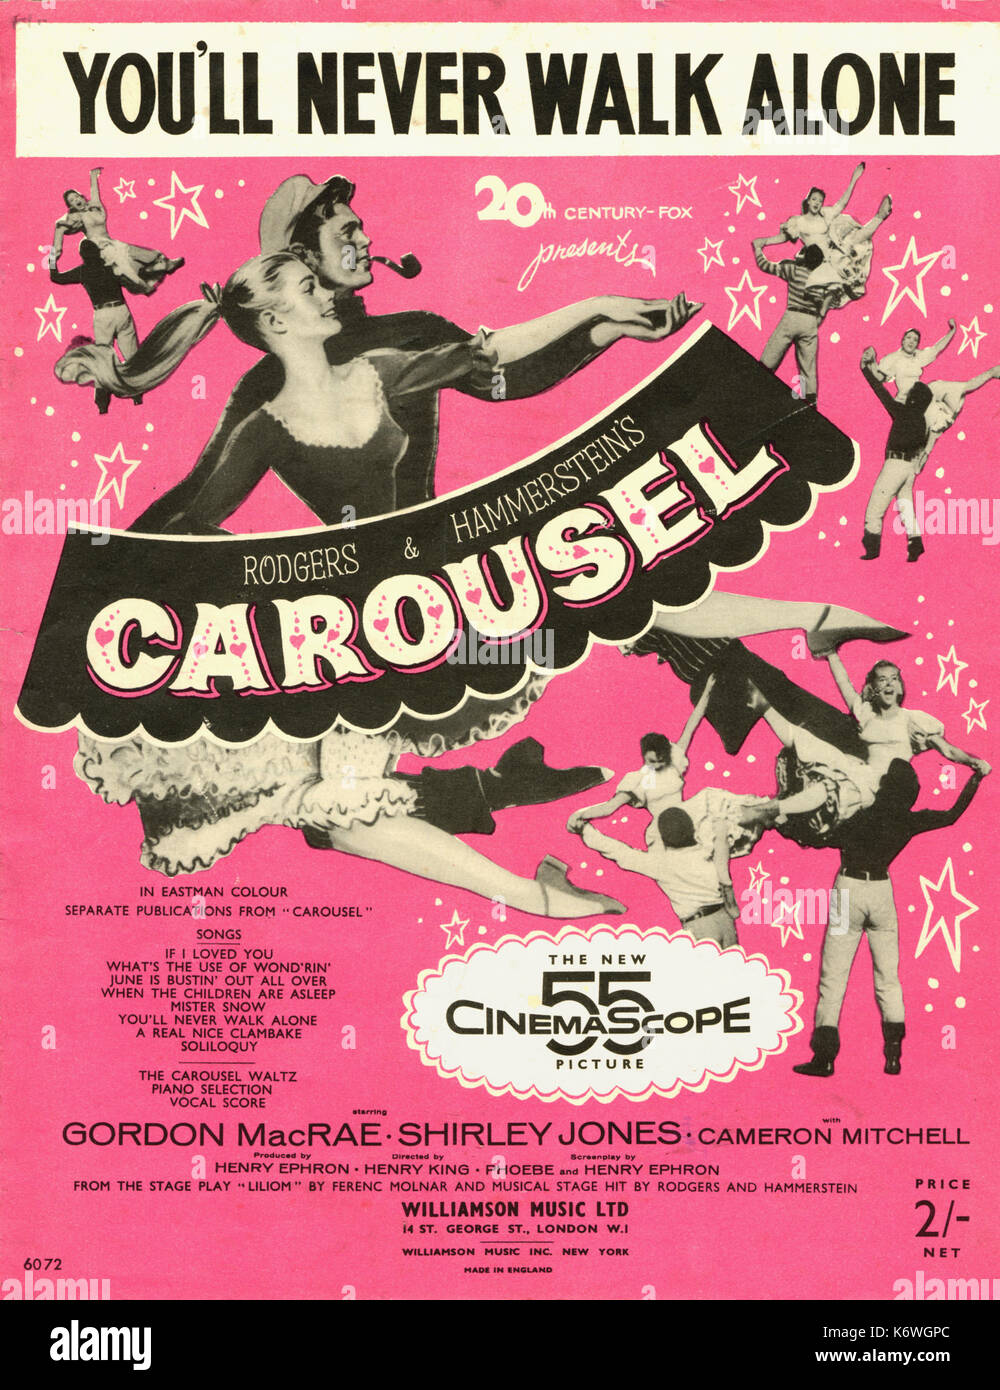 RODGERS & HAMMERSTEIN - CAROUSEL Illustrated score cover for 'You'll Never  Walk Alone' from the Musical 'Carousel' Dance Stock Photo - Alamy